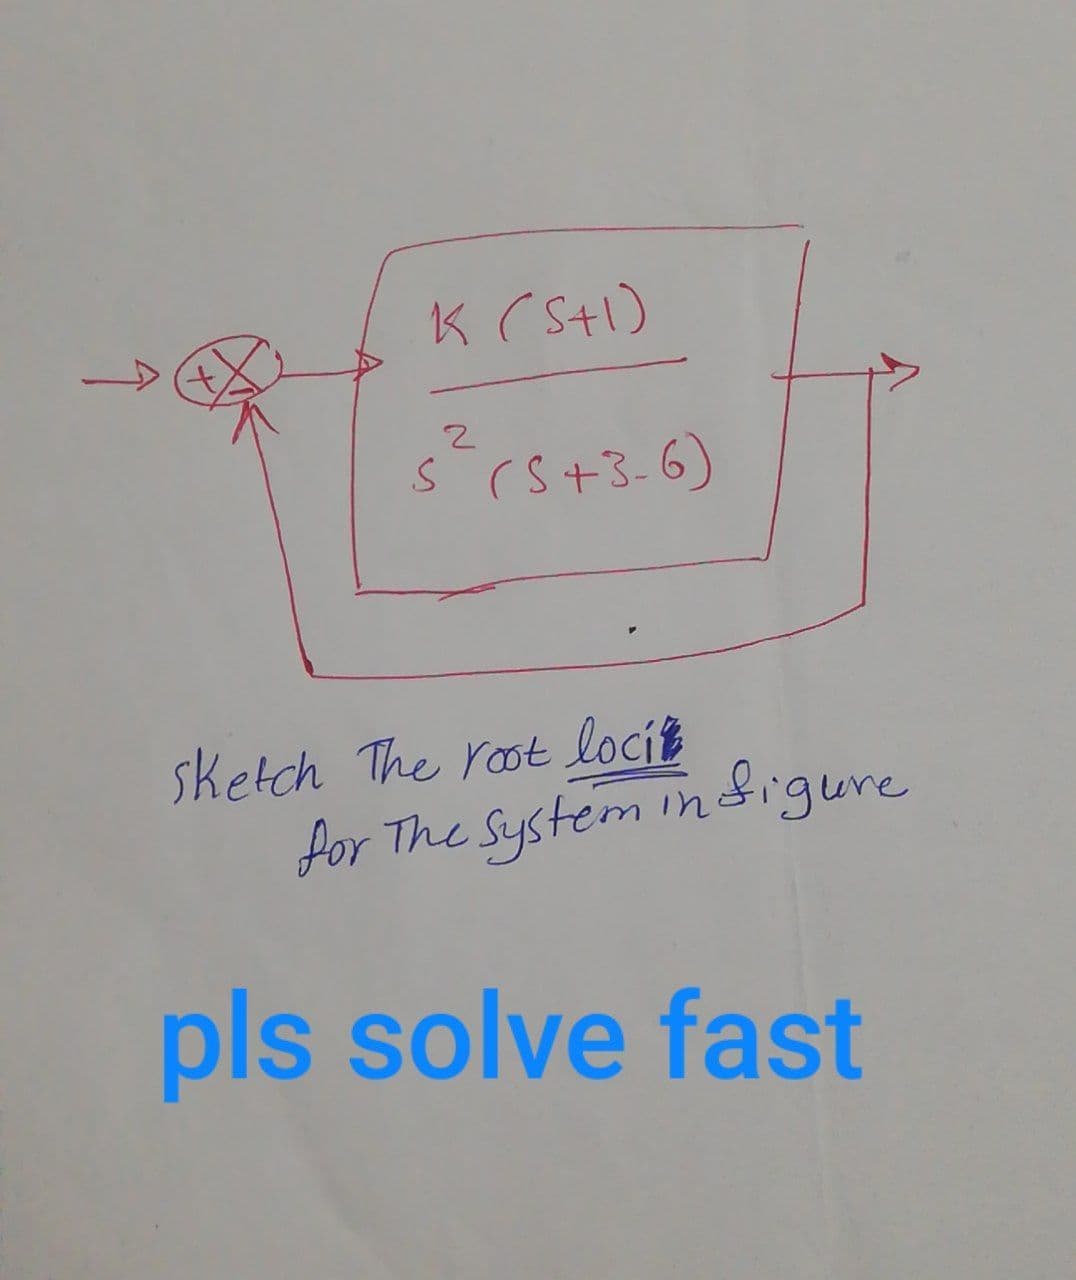 ↑
K (5+1)
2
s² (5+3-6)
sketch The root locit
for the system in figure
pls solve fast